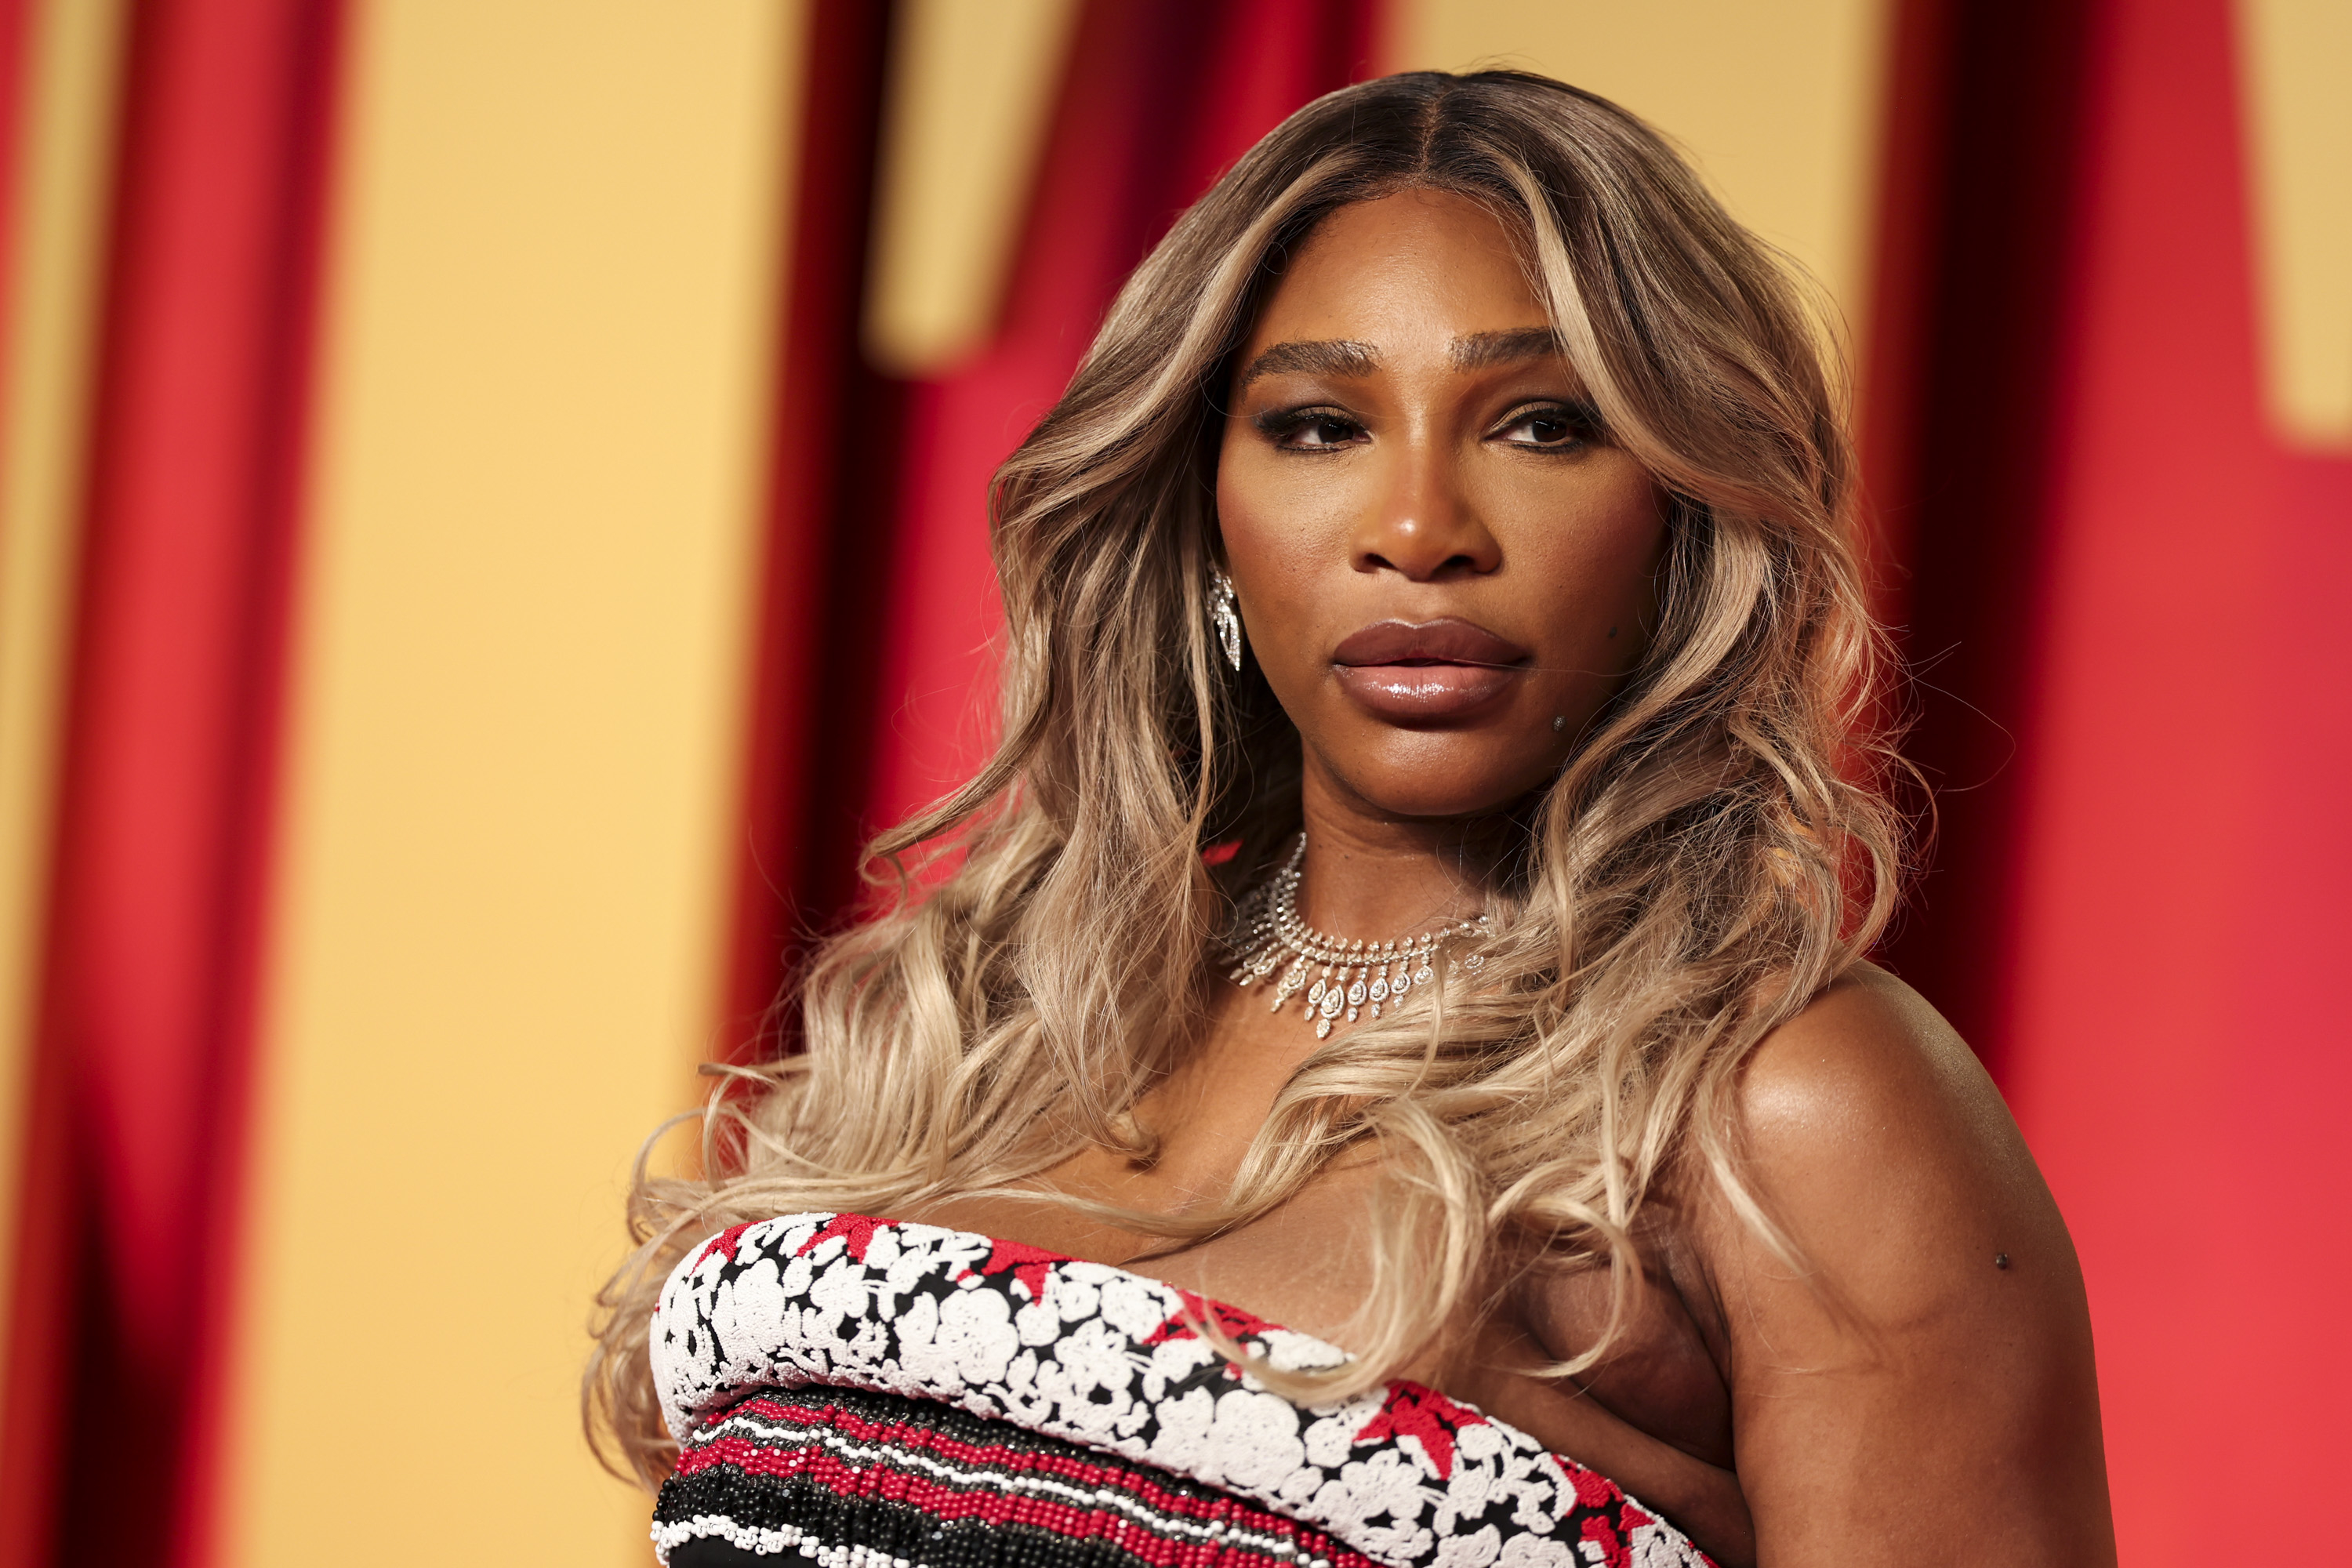 Serena Williams is wearing a strapless patterned dress and a diamond necklace on a red carpet